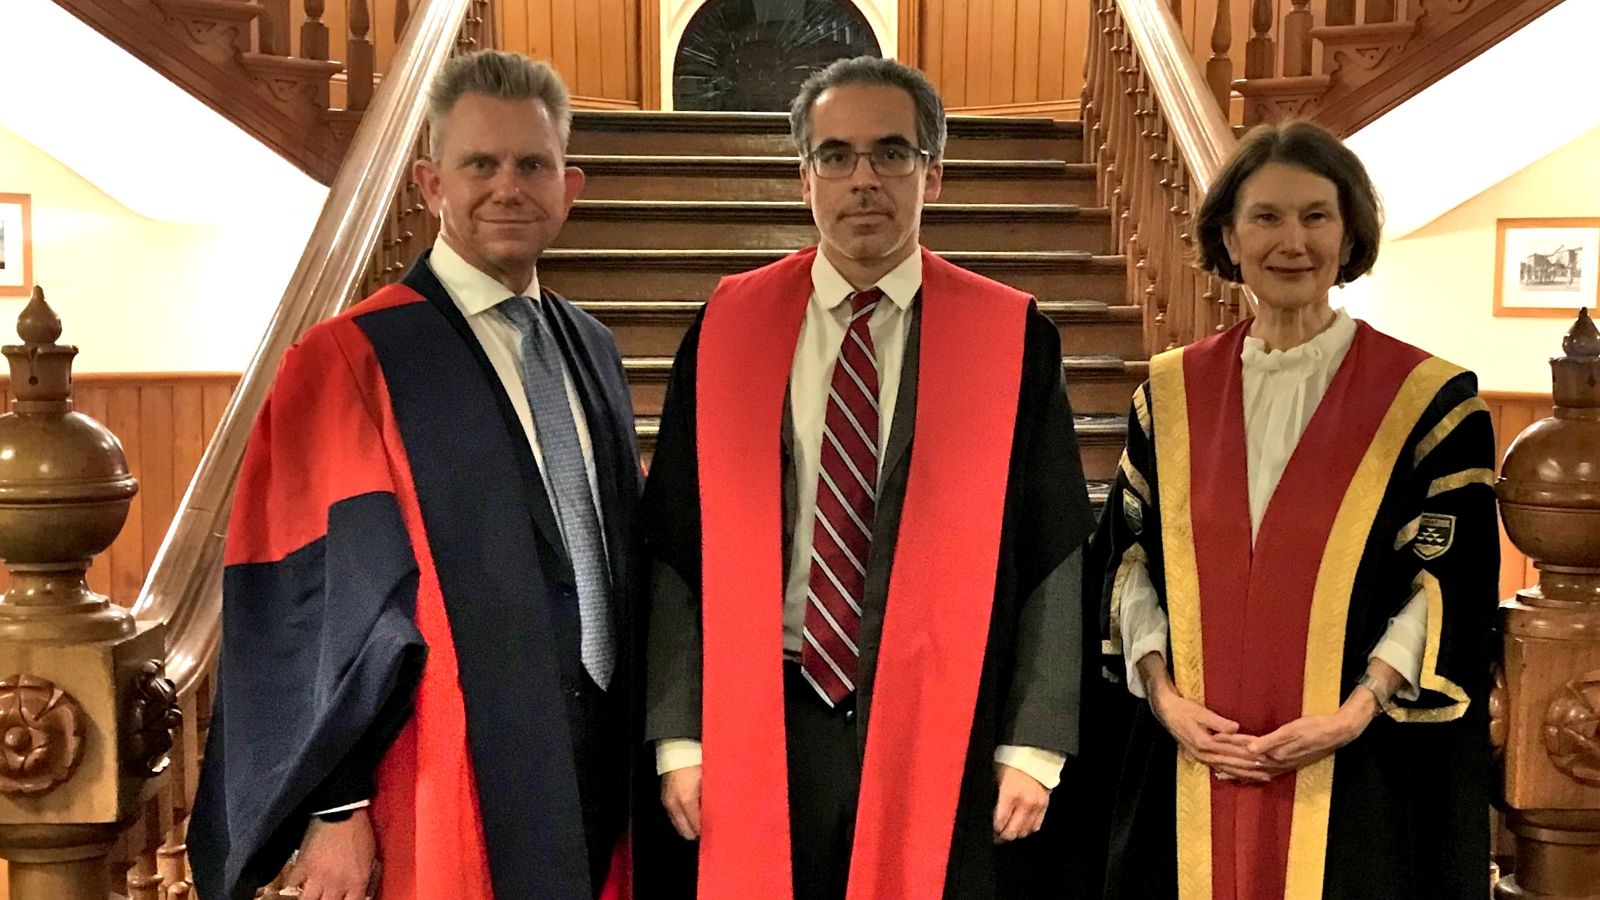 Three academics wearing formal gowns on the stairs of the Old Government building, from left to right Professor Mark Hickford, Professor Joel Colón-Ríos and Acting Vice-Chancellor Professor Jennifer Windsor.